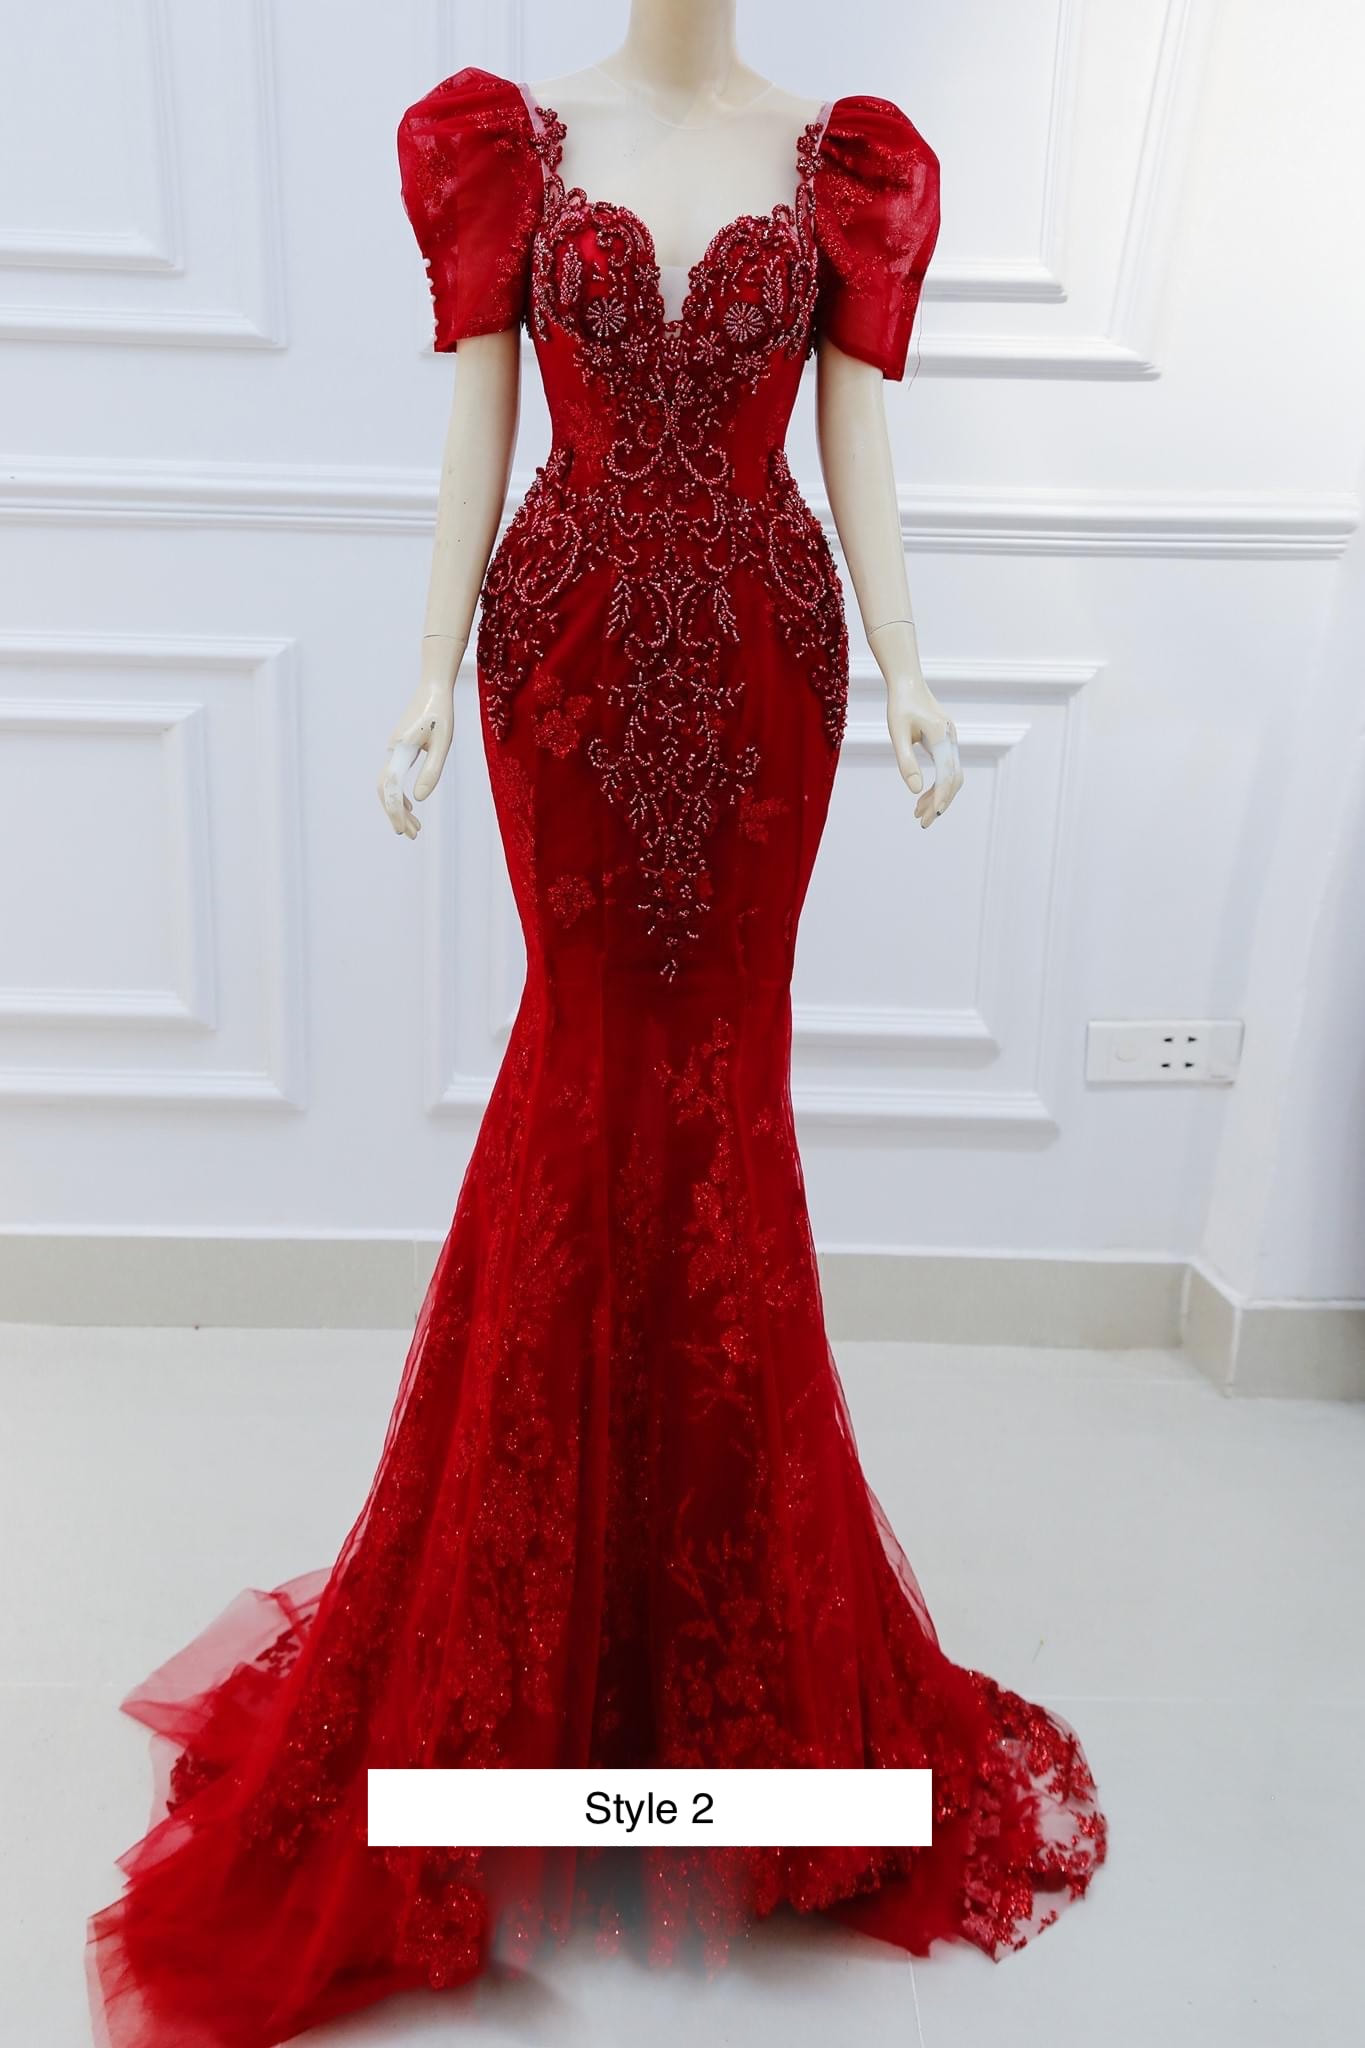 Red Sequin Beaded Mermaid Feather Evening Gown With V Neck And Long Sleeves  Luxury Prom Gown With Ruffle Open Back And Sweep Train For Formal Parties  From Huifangzou, $30.99 | DHgate.Com